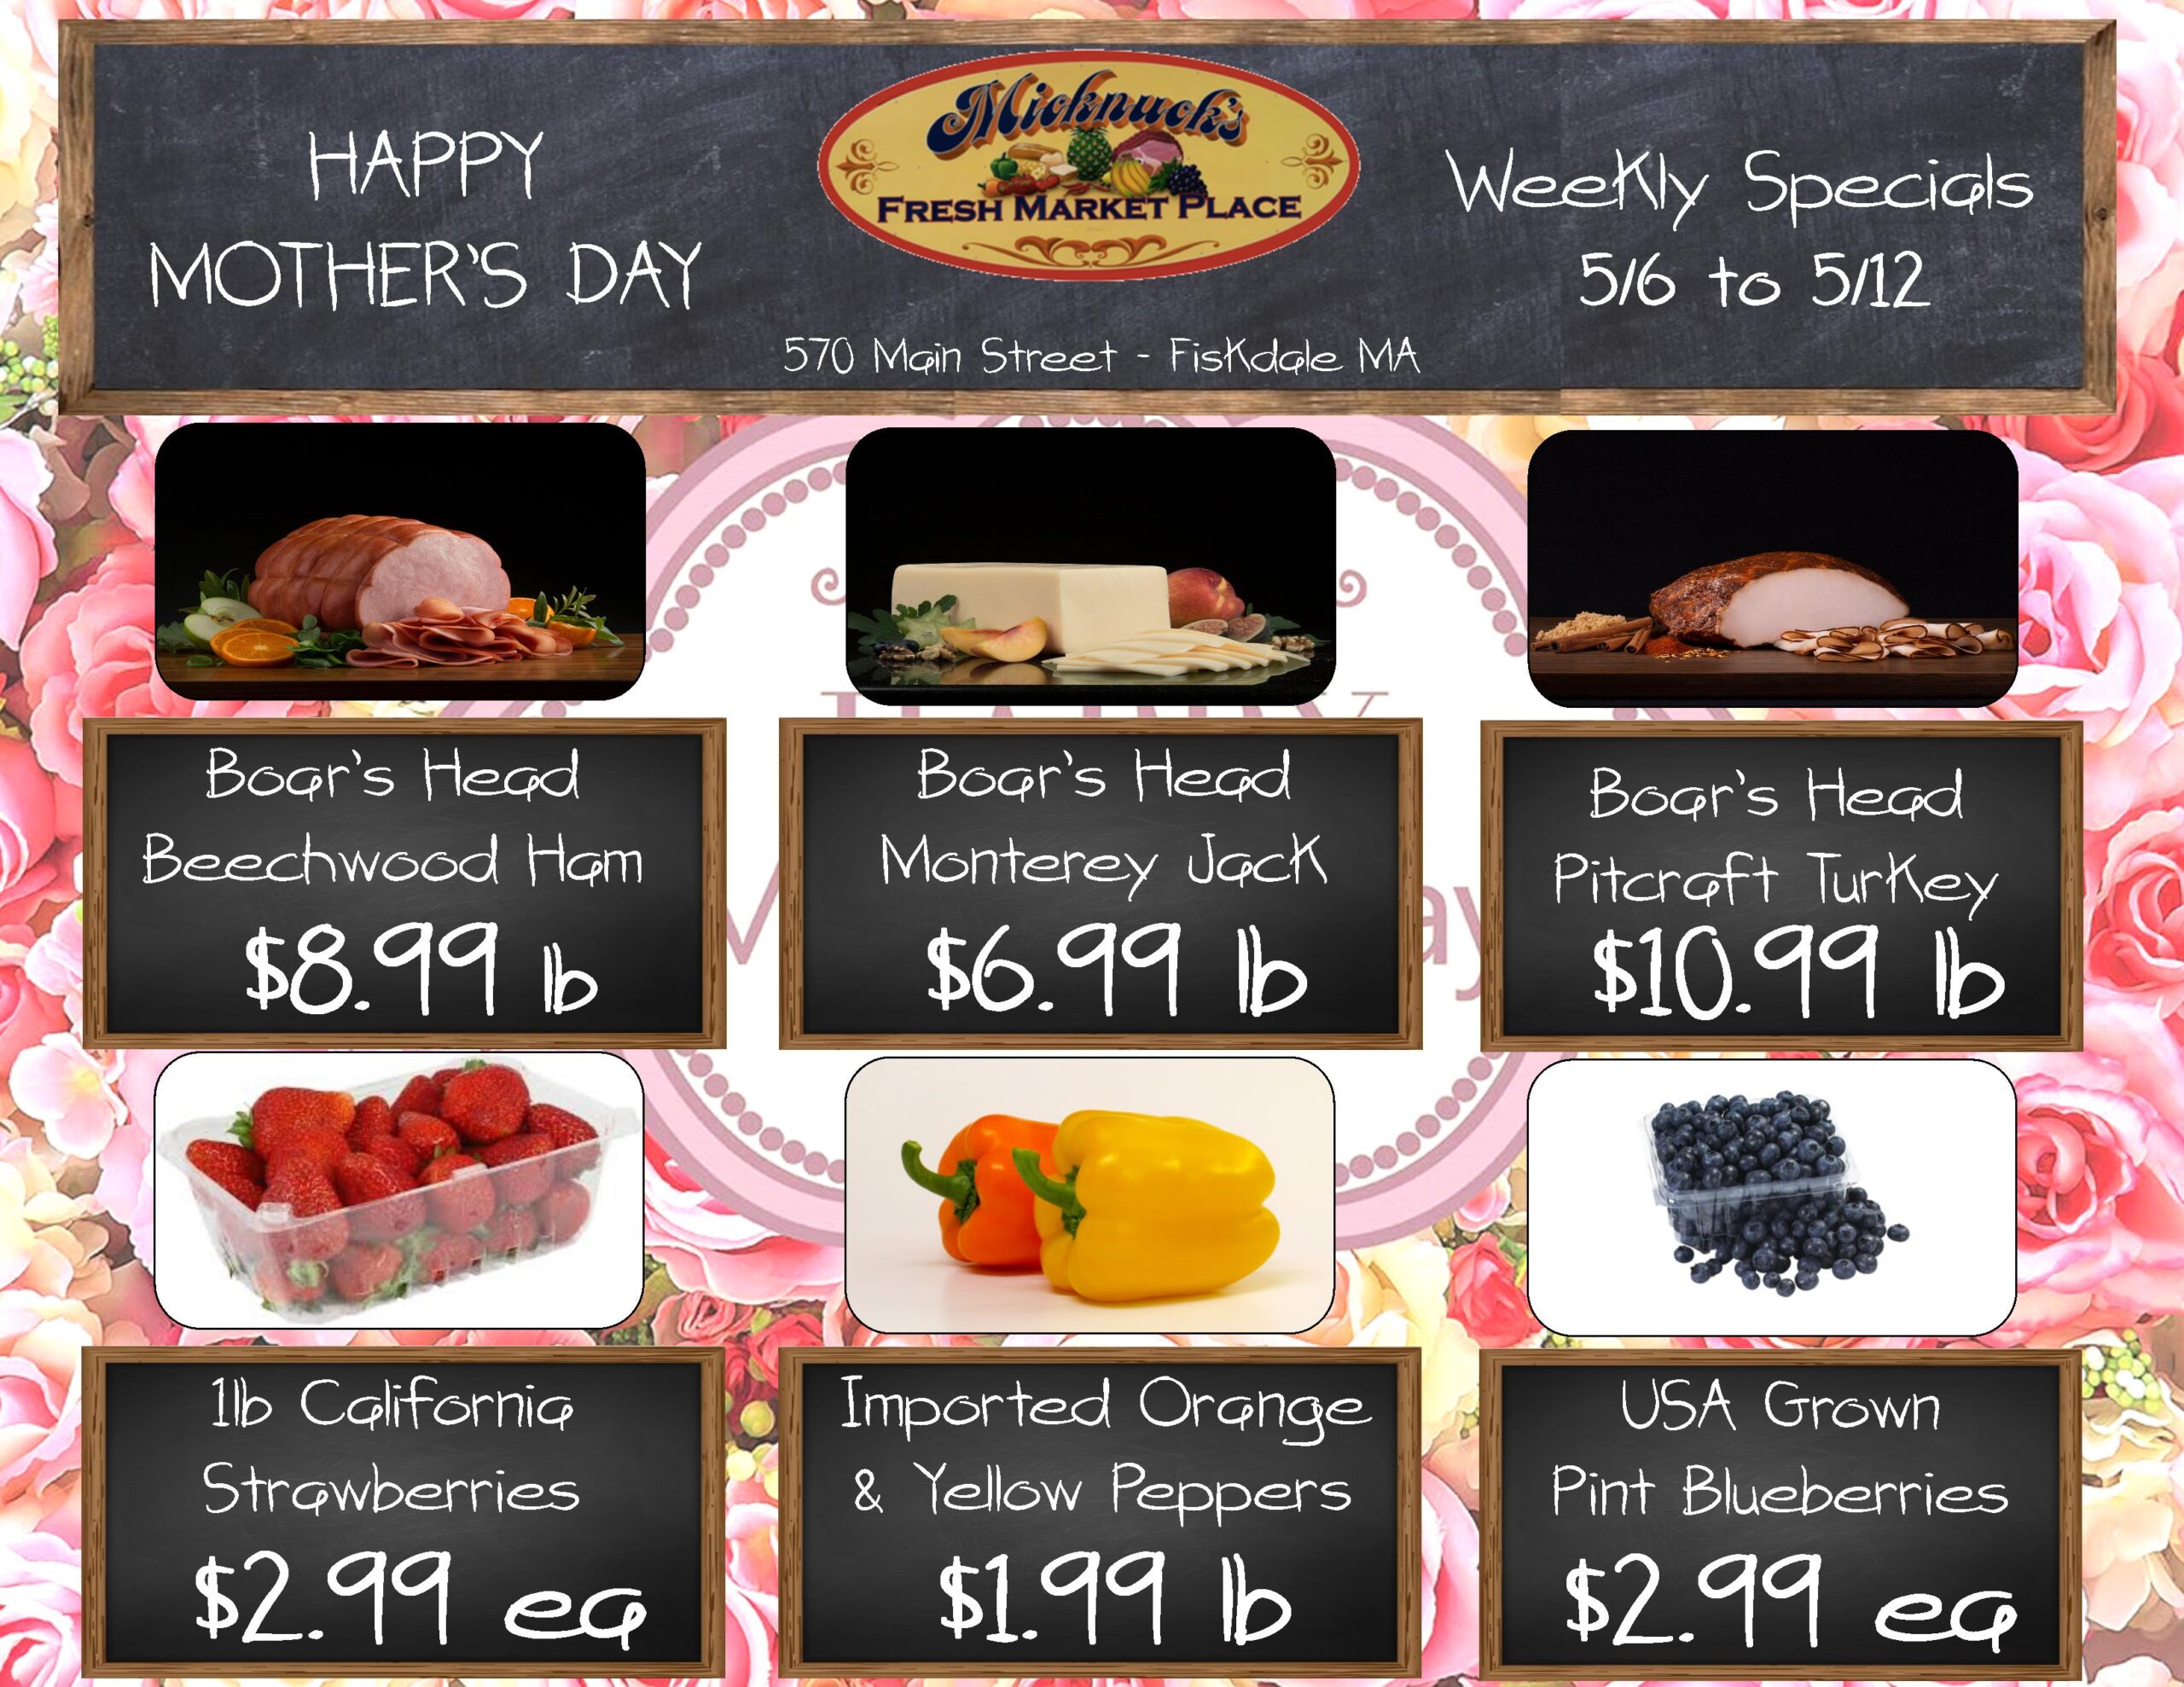 Weekly Specials 5/6 to 5/12
Boars Head beechwood ham $8.99lb
Boars Head Monterey Jack $6.99lb
Boars head pitcraft Turkey $10.99lb
1lb California strawberries $2.99 each
imported orange and yellow peppers $1.99lb
Usa grown Pint blueberries $2.99 ea
